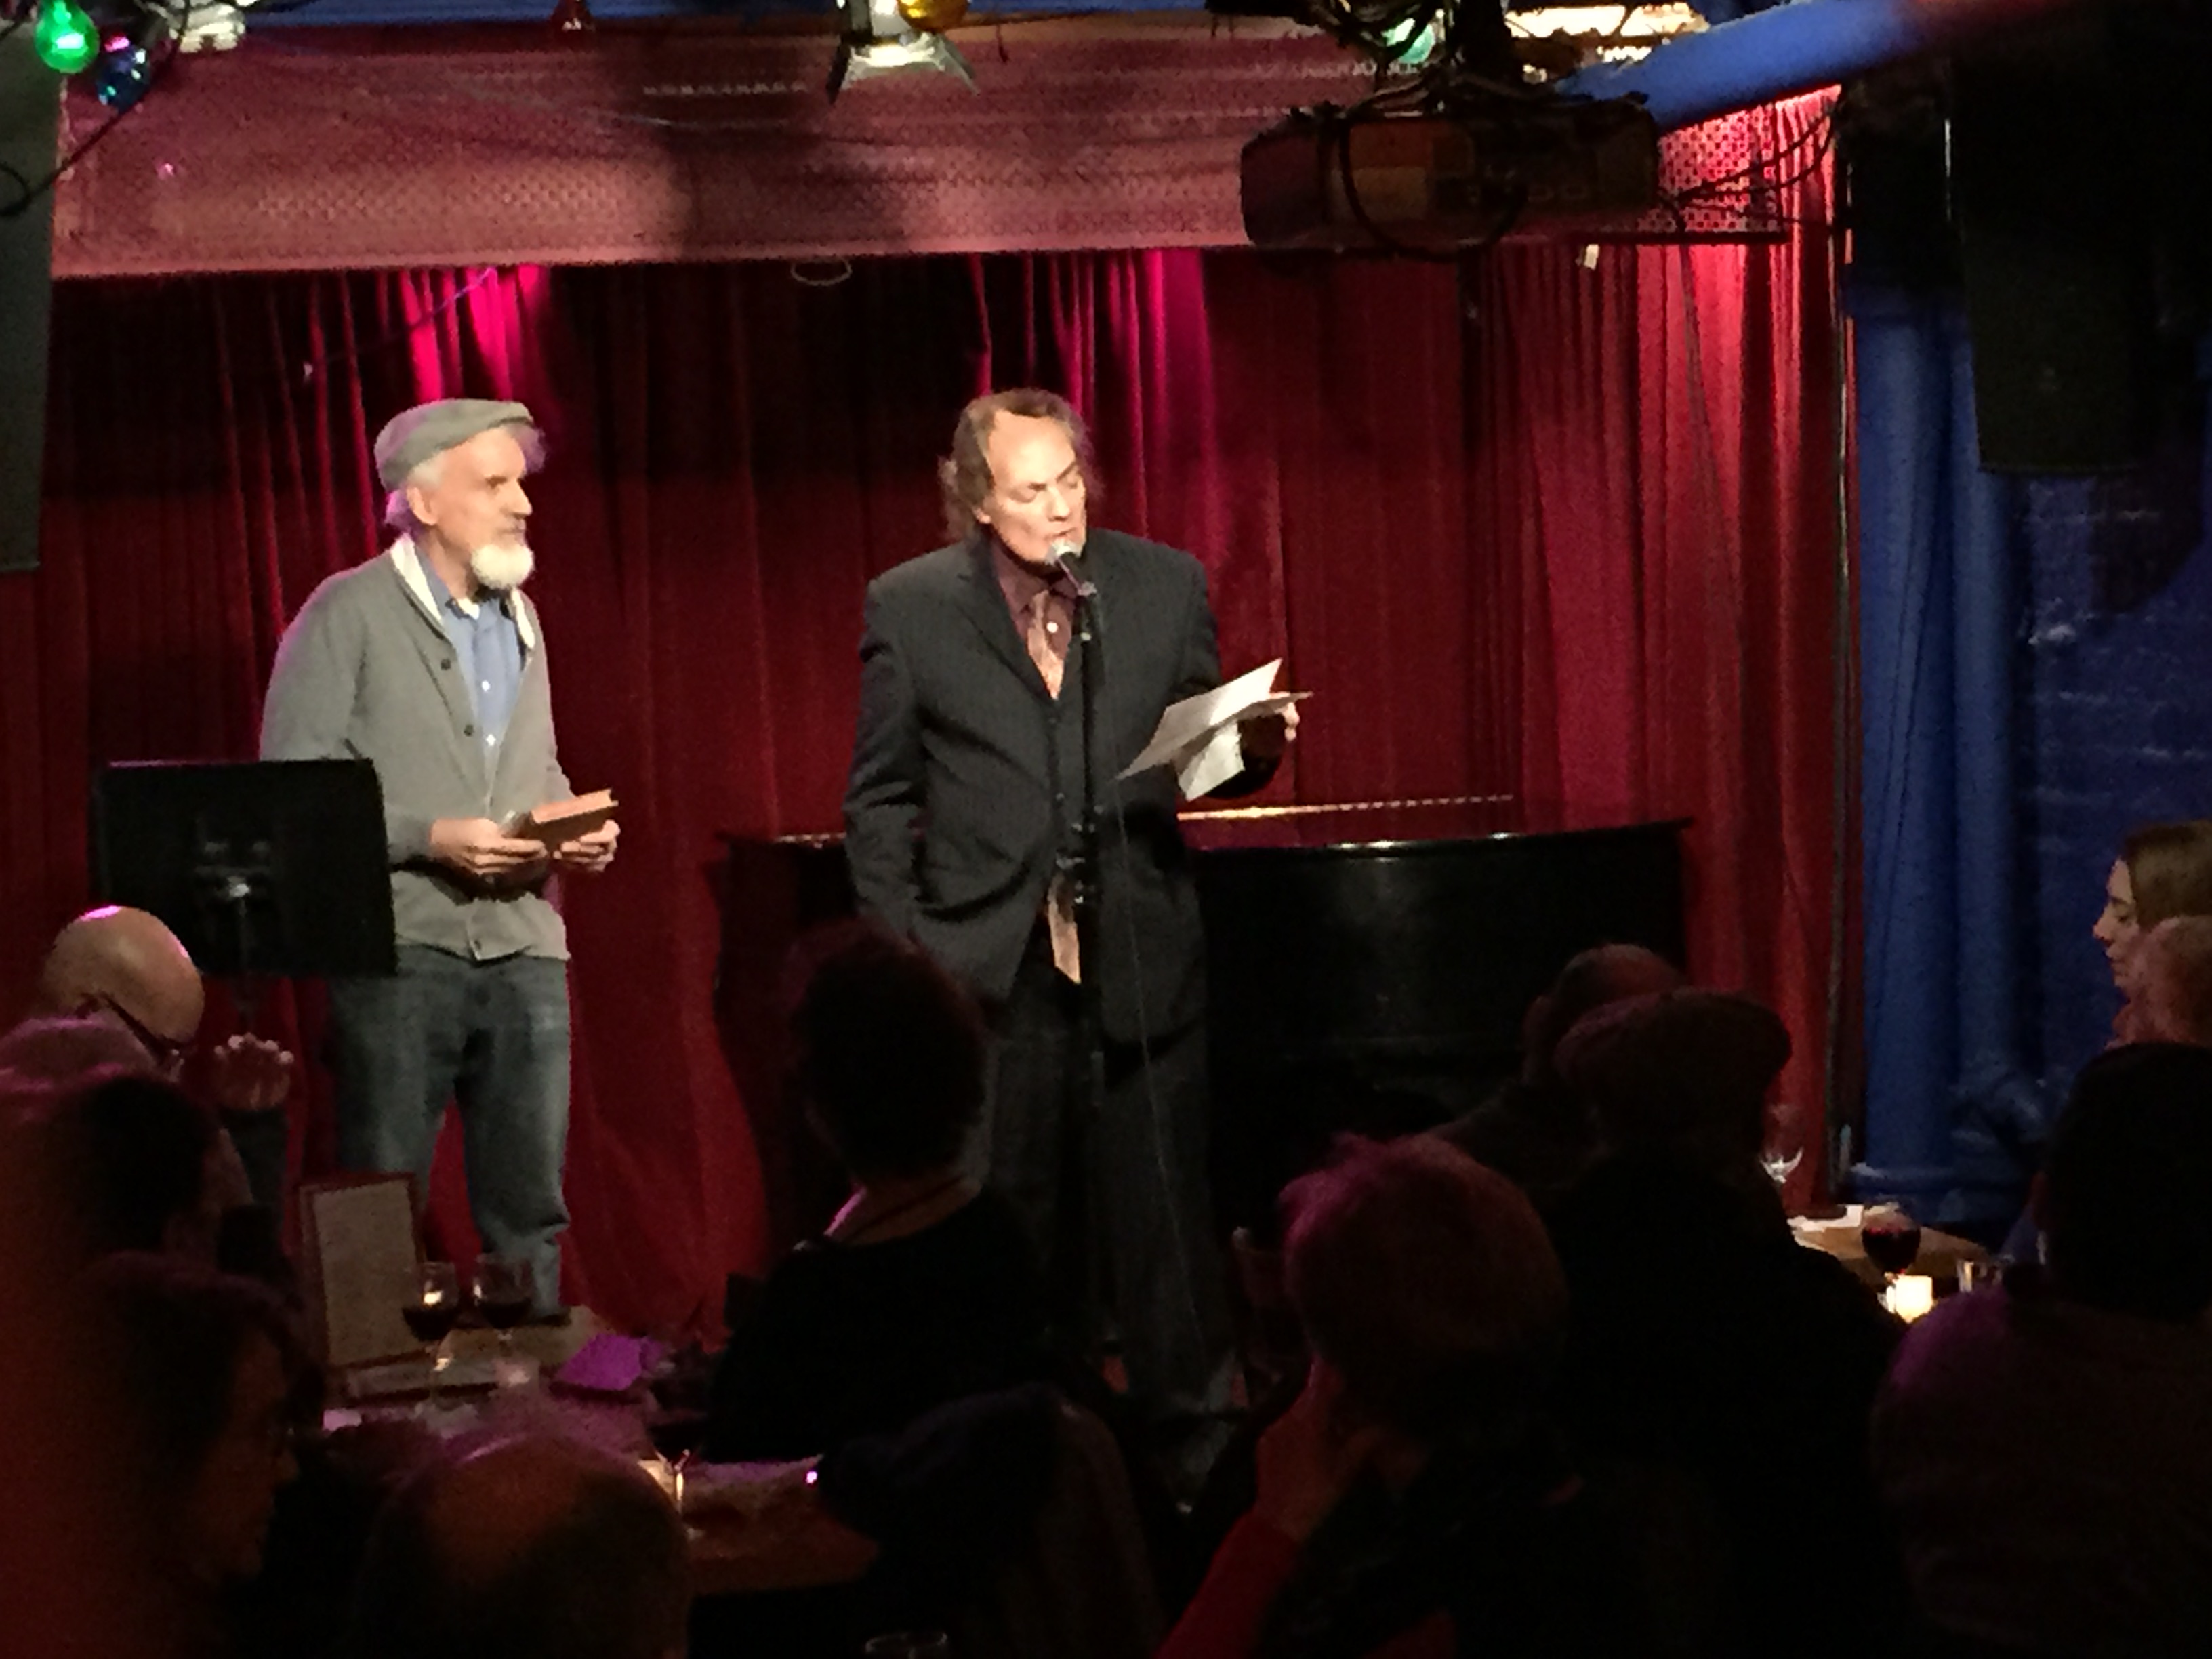 Frank De Lucia and I performing one of his poems at the Cornelia St. Cafe in January 2015.